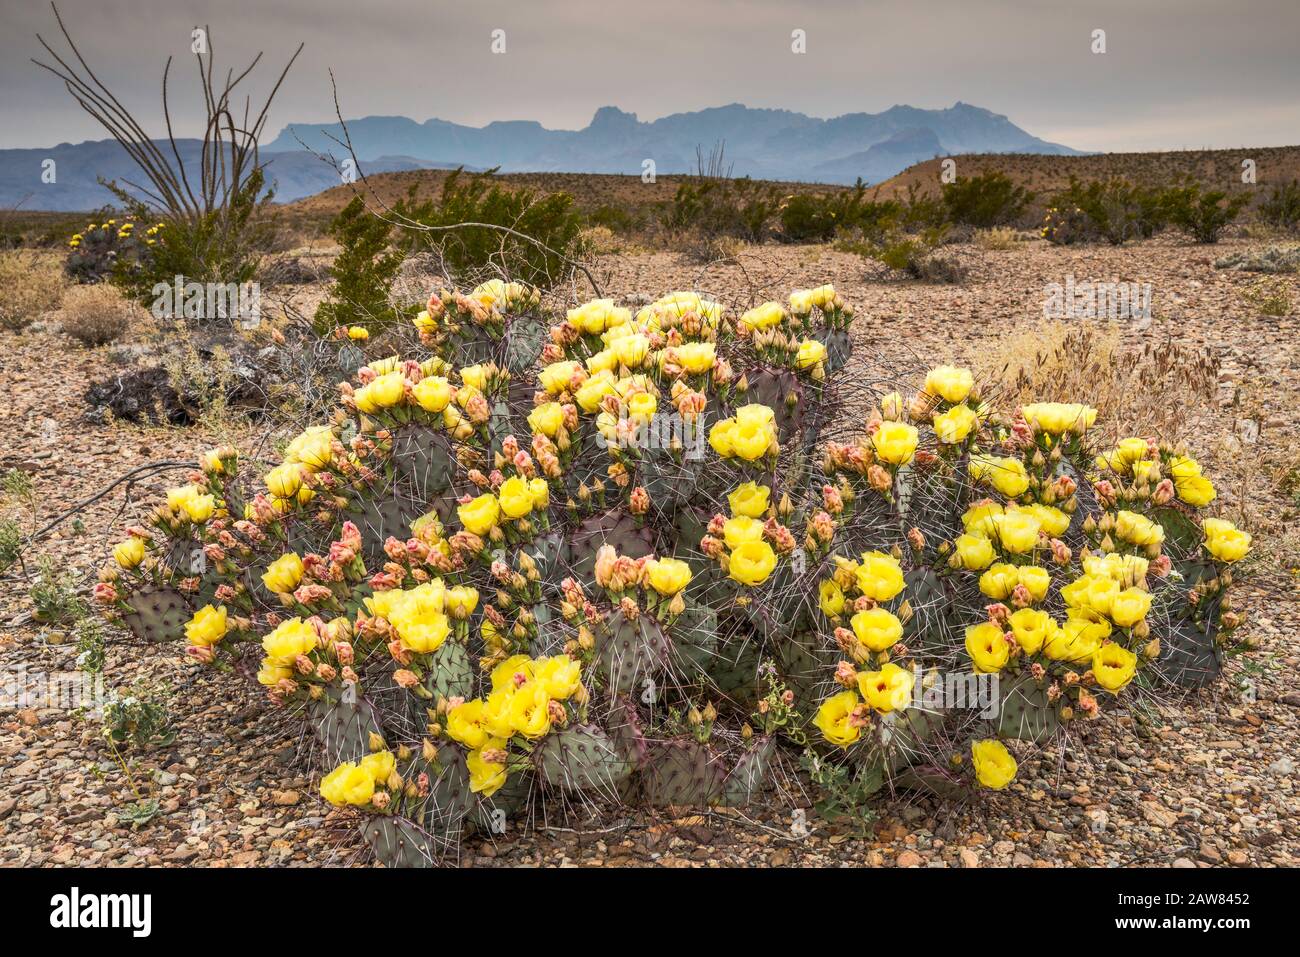 Prickly pear cactus in bloom, Chisos Mountains in distance, Chihuahuan Desert, Big Bend National Park, Texas, USA Stock Photo